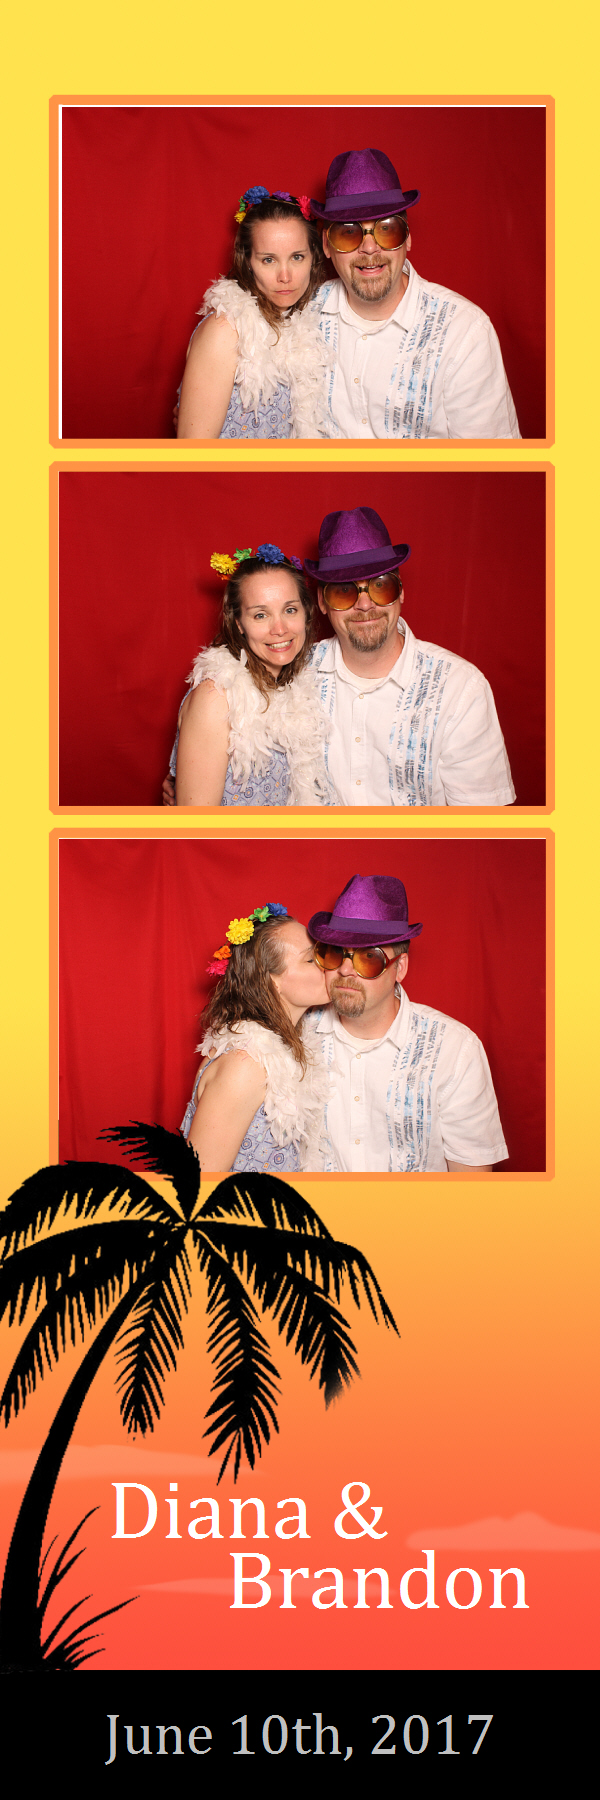 2x6 photo strip of couple posing with red backdrop